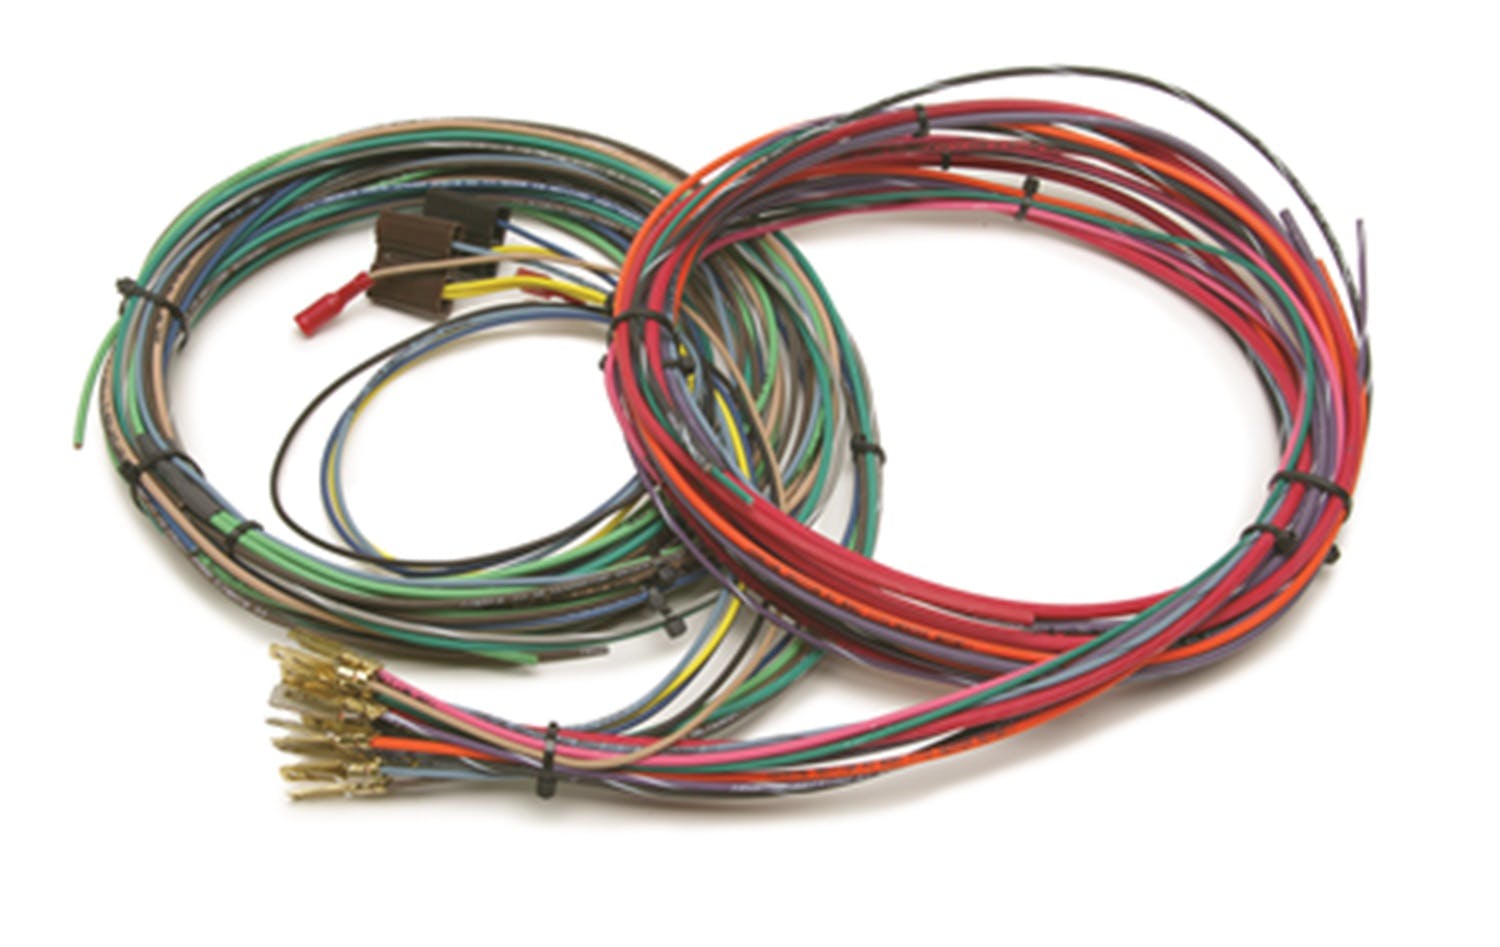 Painless 21000 Engine Harness only for 20101 w/o bulkhead connector-10 Circuits